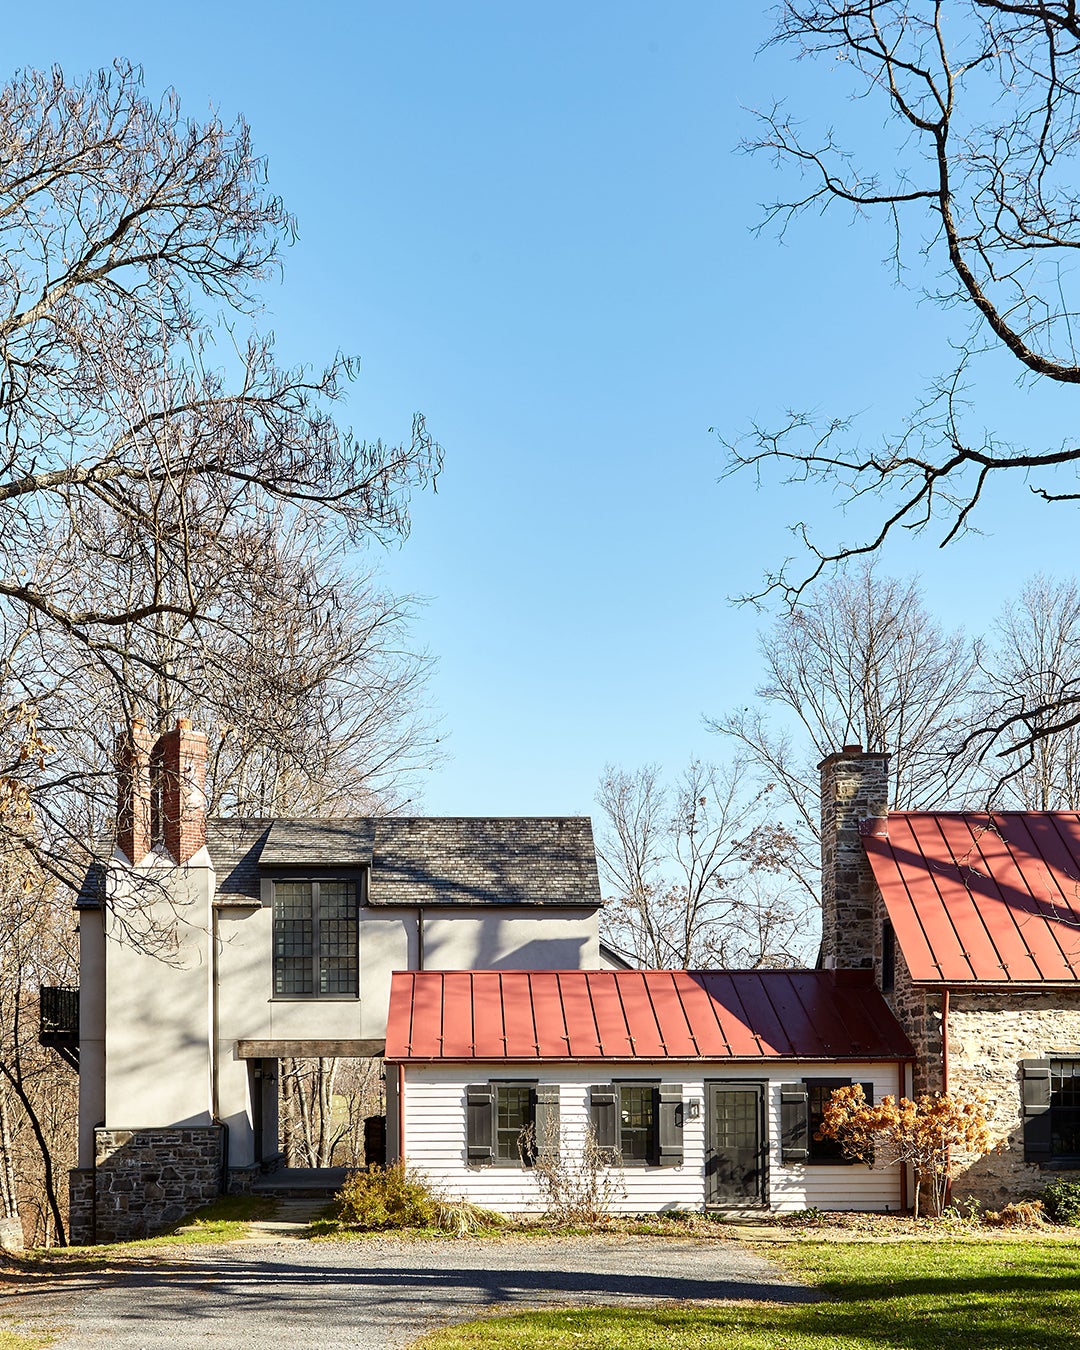 Red metal roof and exterior shot of all three homes